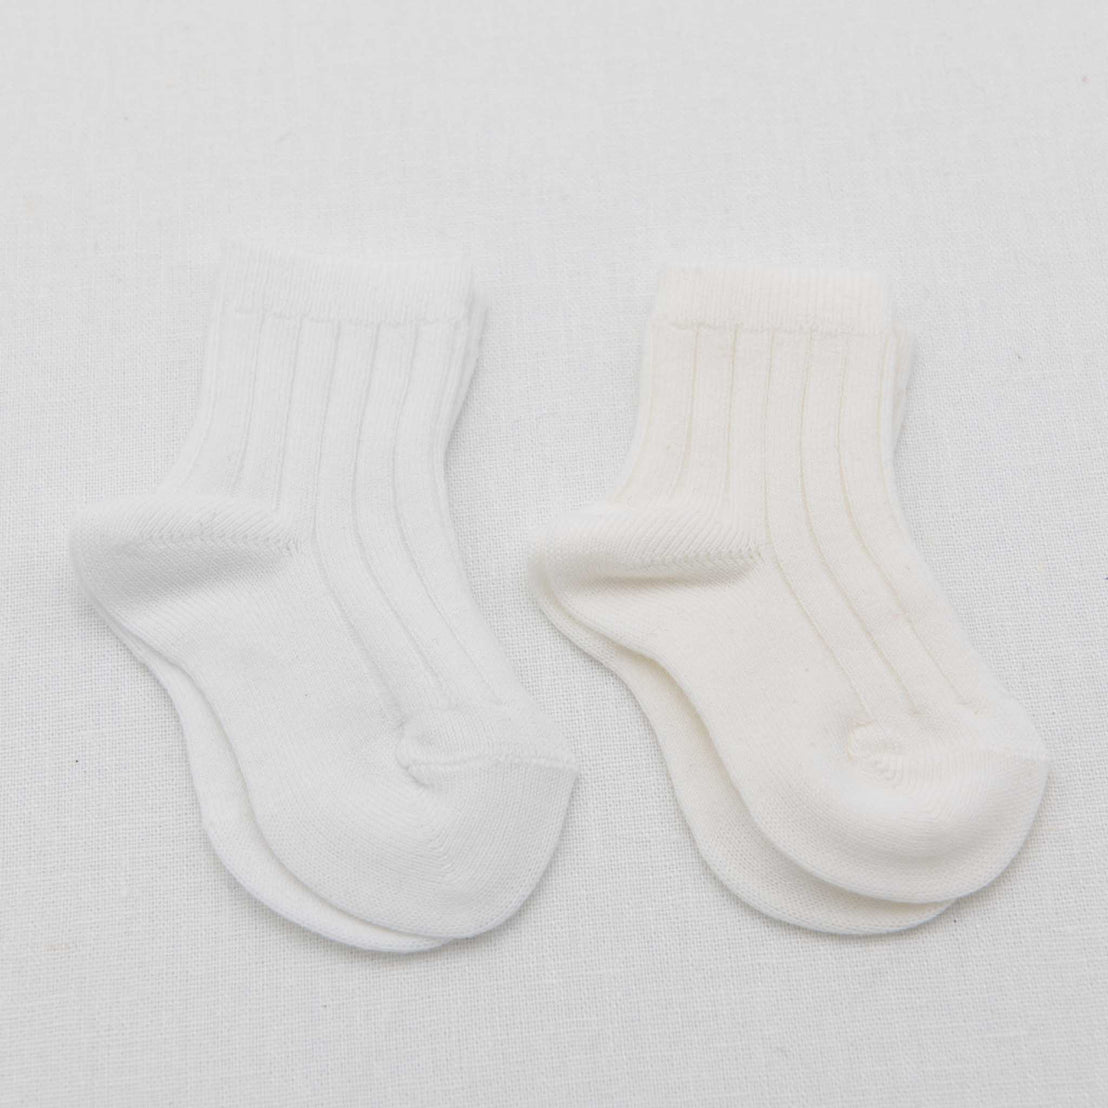 A pair of Ribbed Socks displayed on a plain white background.